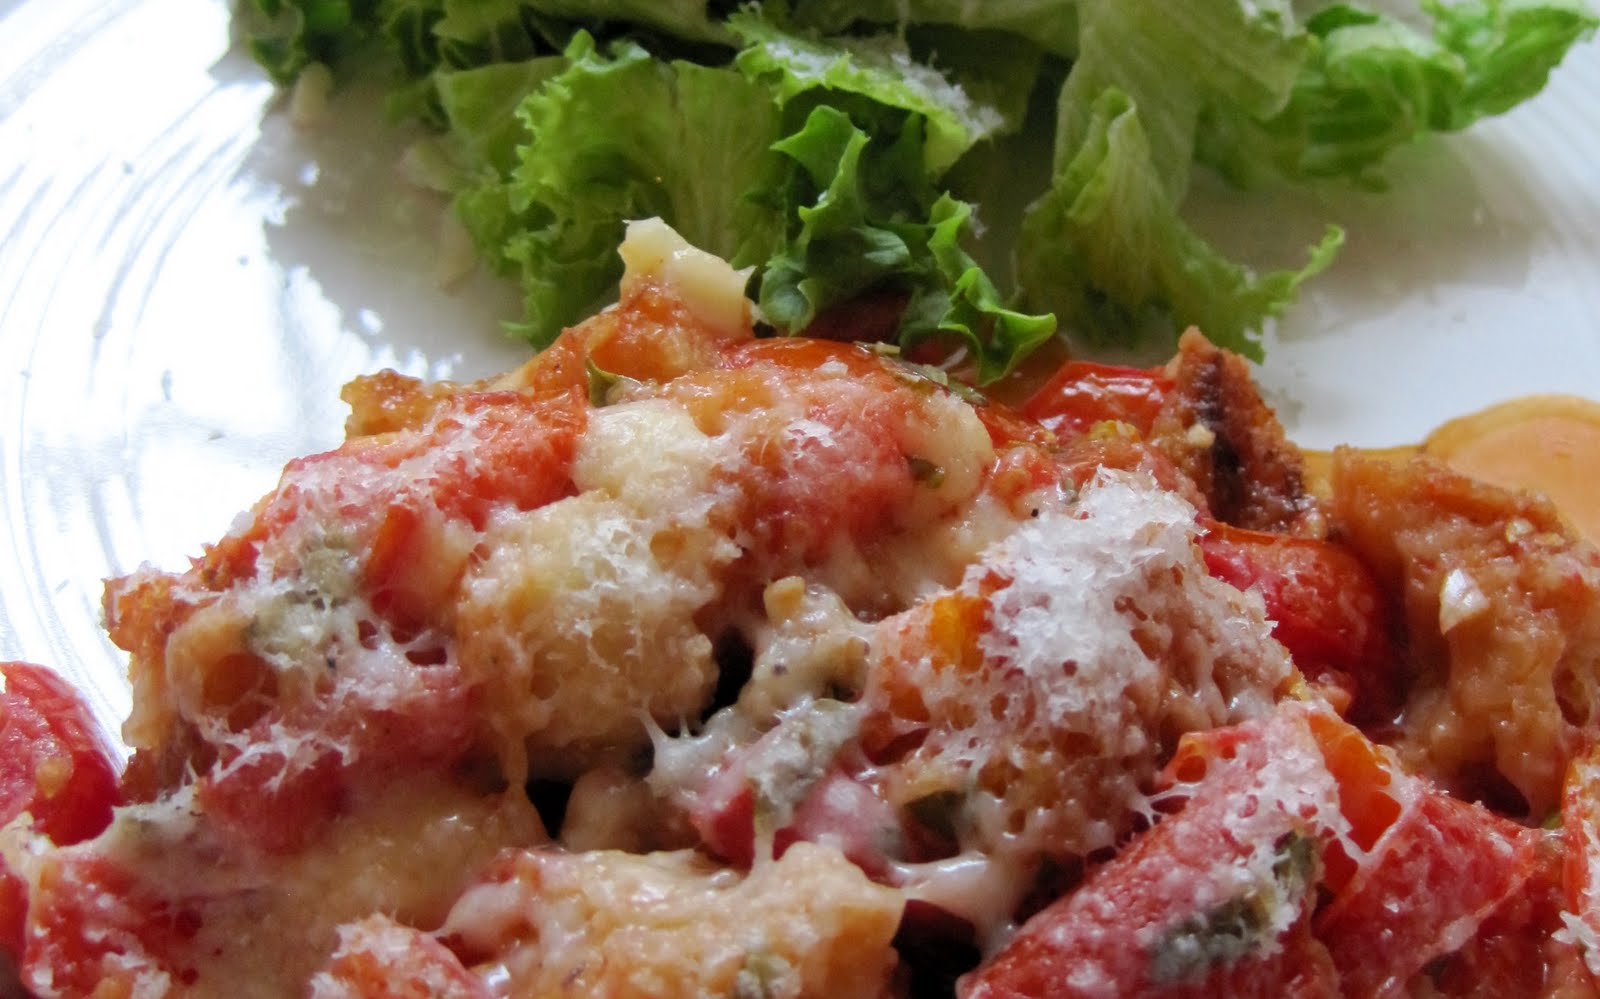 Alissamay's: Scalloped Tomatoes with Croutons